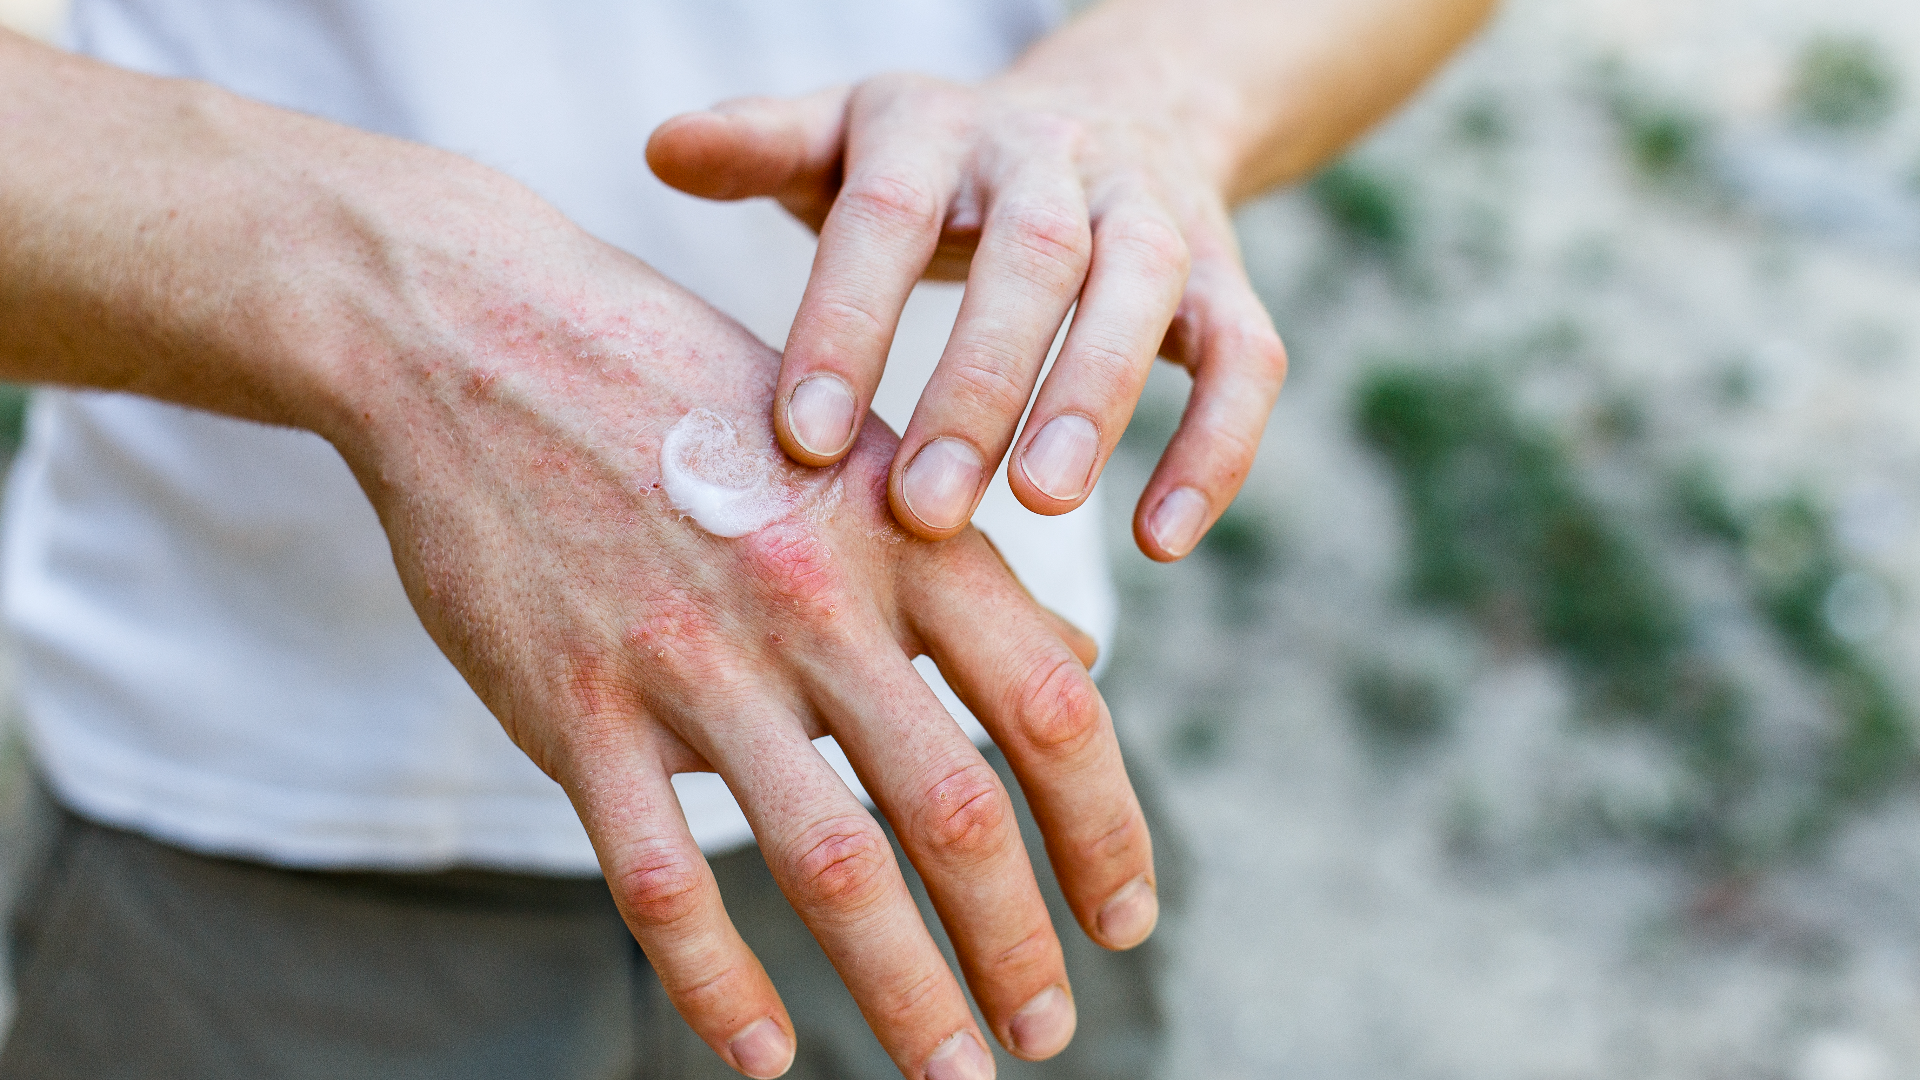 Eczema: Is It a Skin Condition or Something Else?